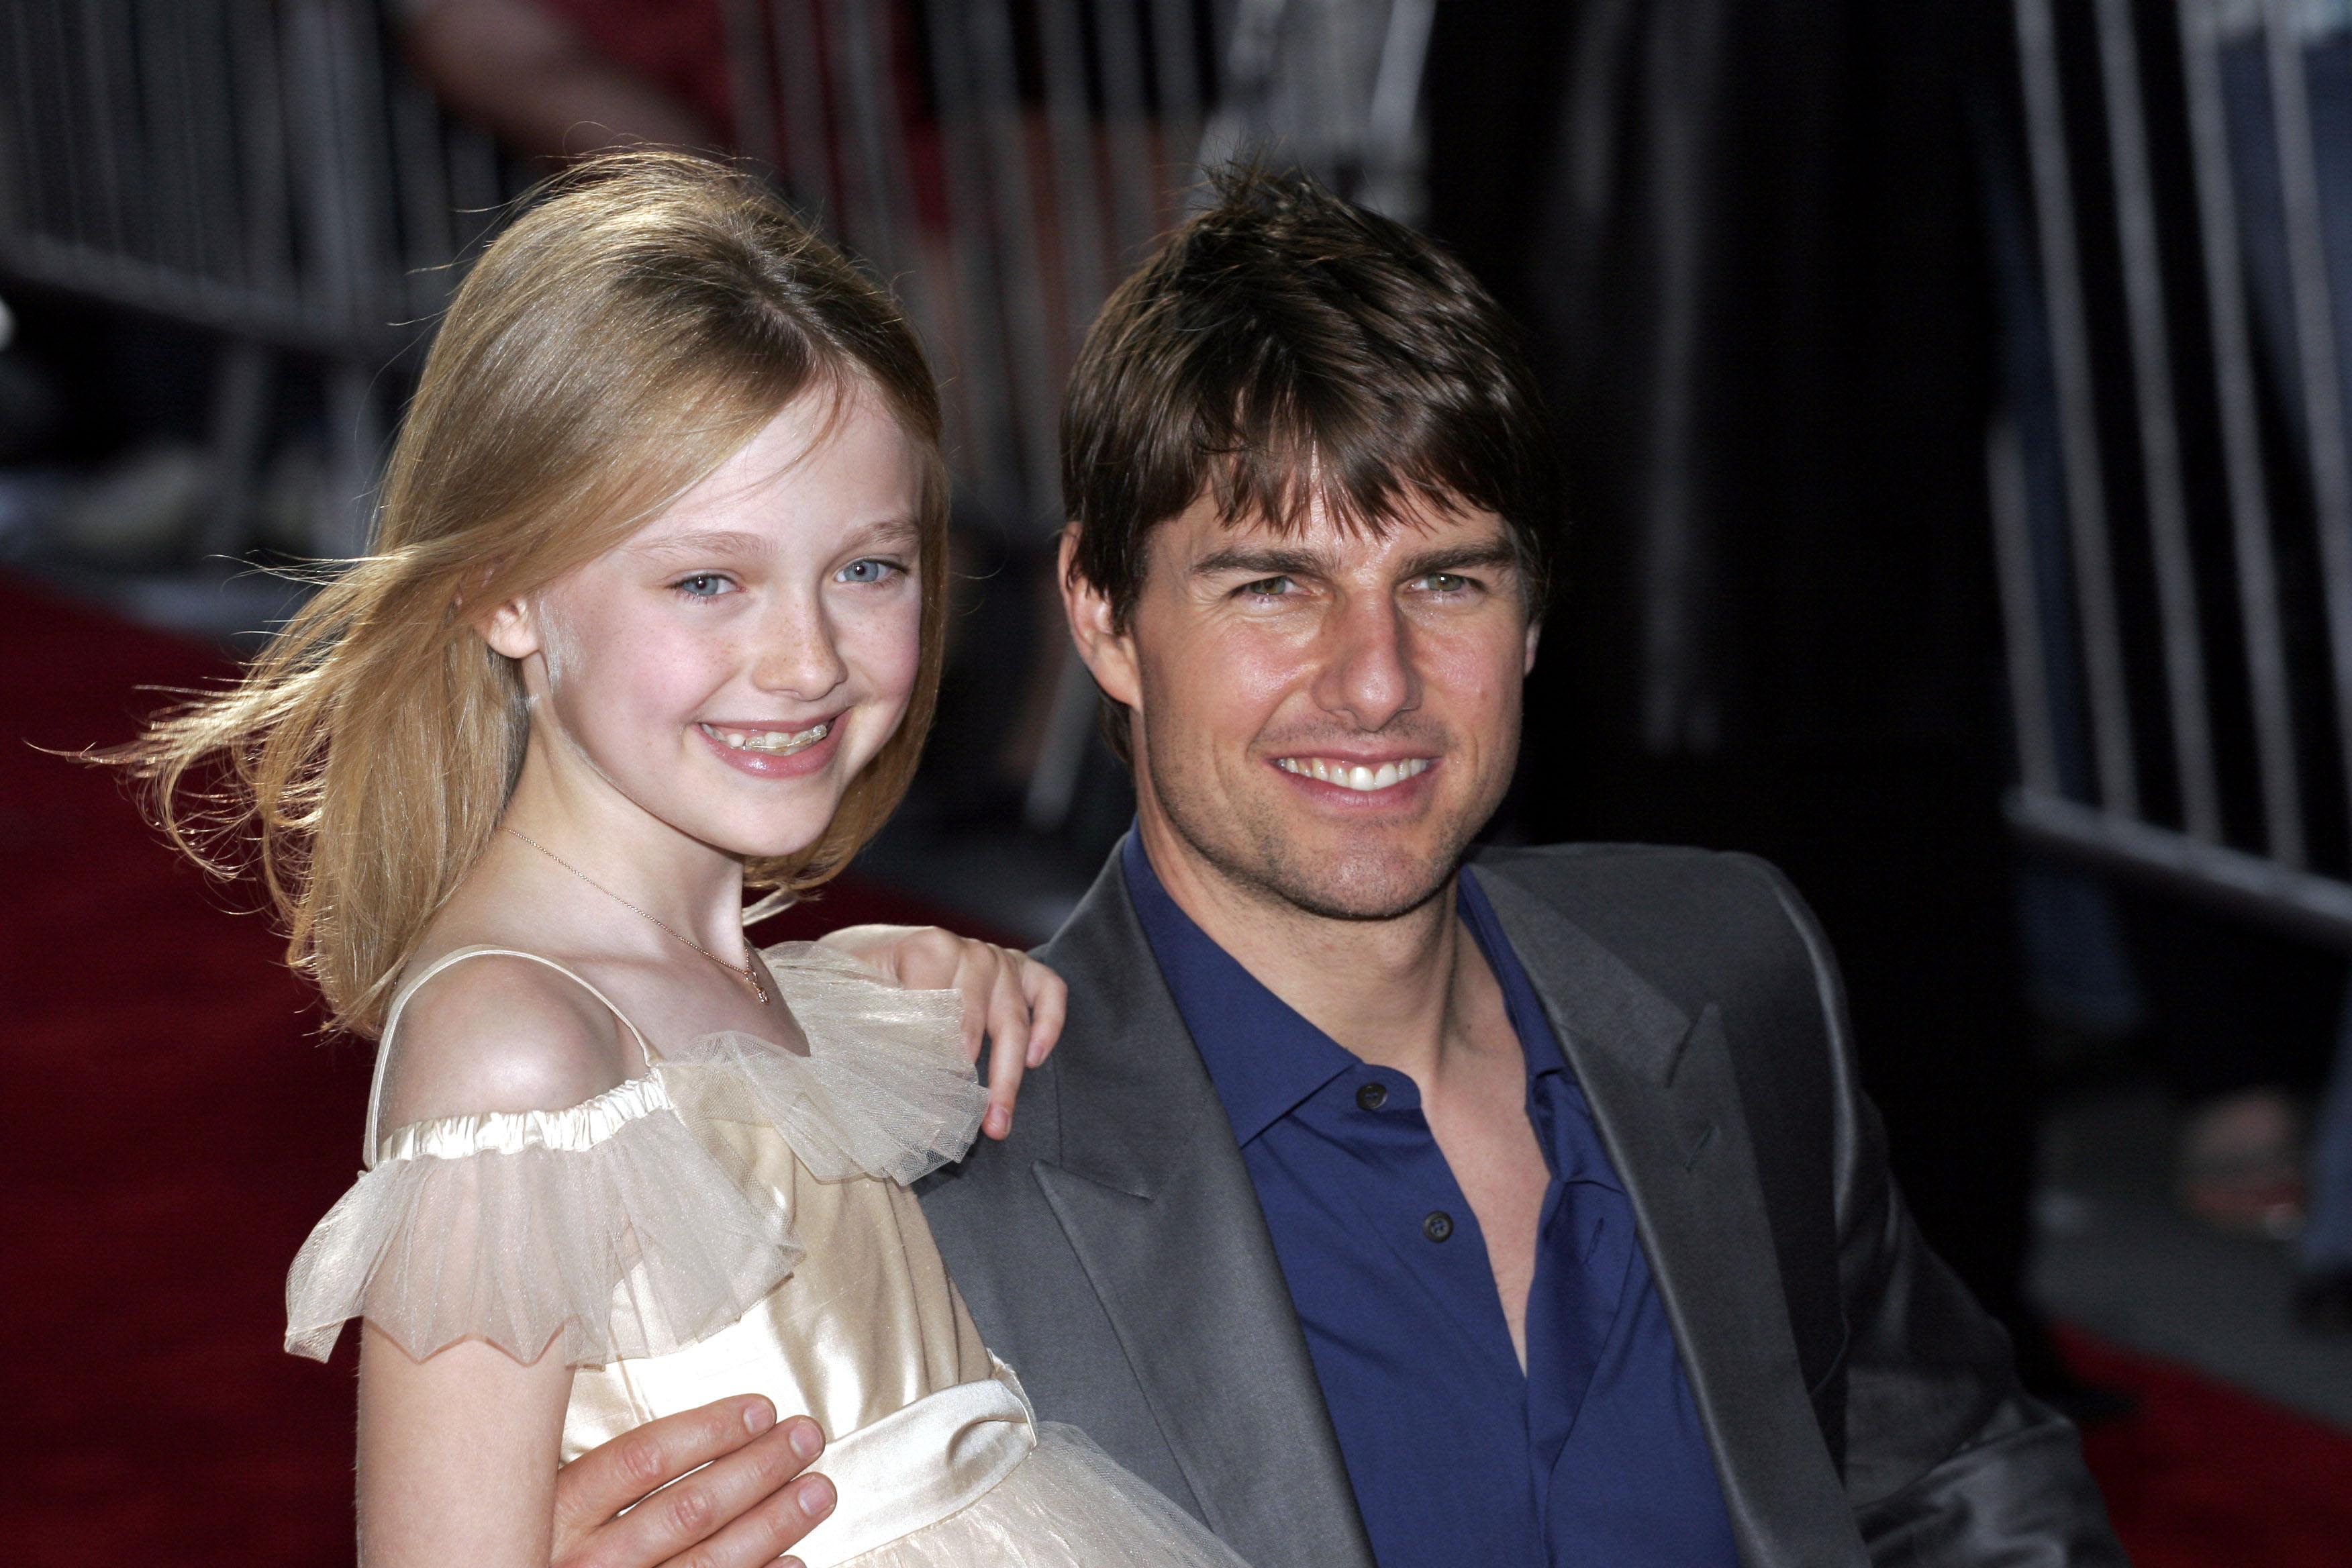 Dakota Fanning Reveals the Birthday Gift Tom Cruise Gives Her Every Year Since 2005’s ‘War of the Worlds’: ‘He Sends Me Shoes’